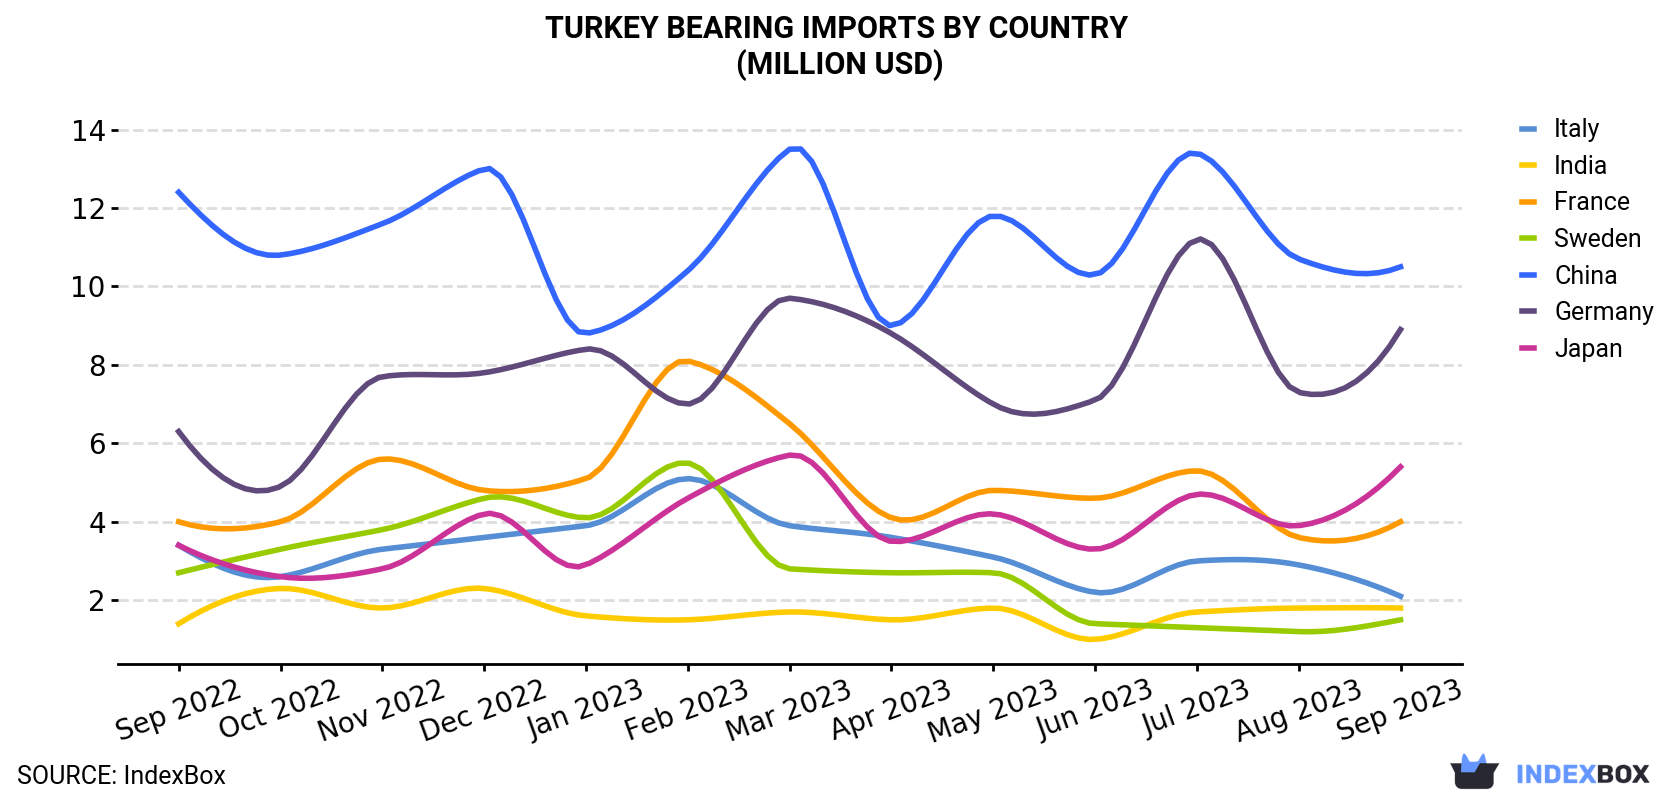 Turkey Bearing Imports By Country (Million USD)